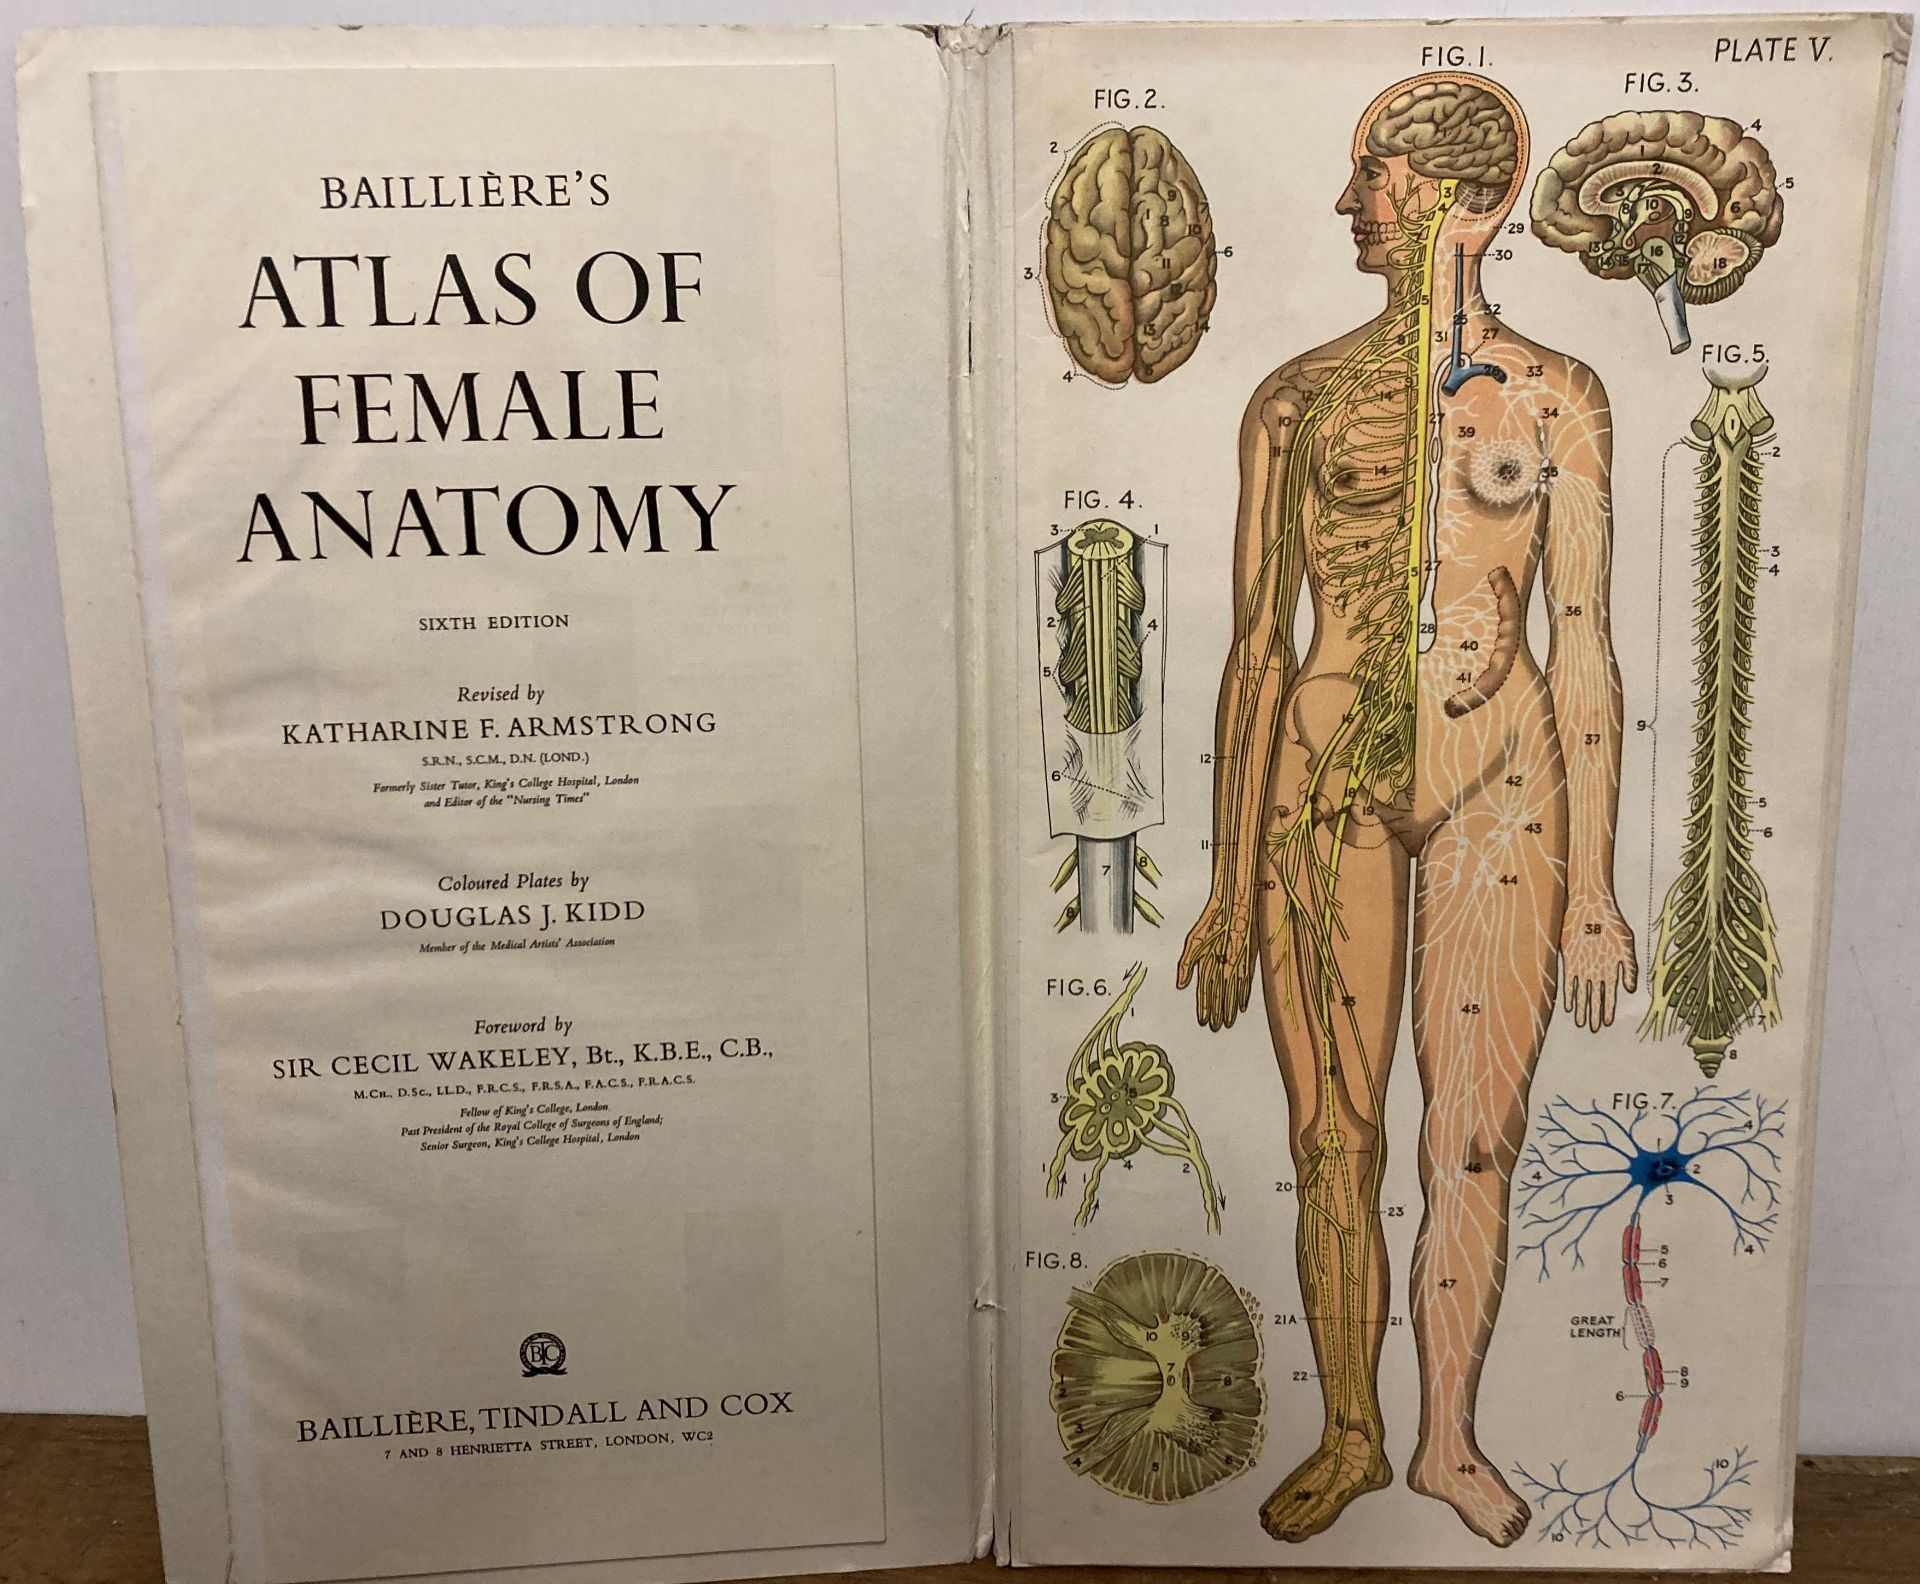 Baillieres 'Atlas of Female Anatomy' Sixth Edition revised by Katharine F Armstrong, - Image 2 of 5